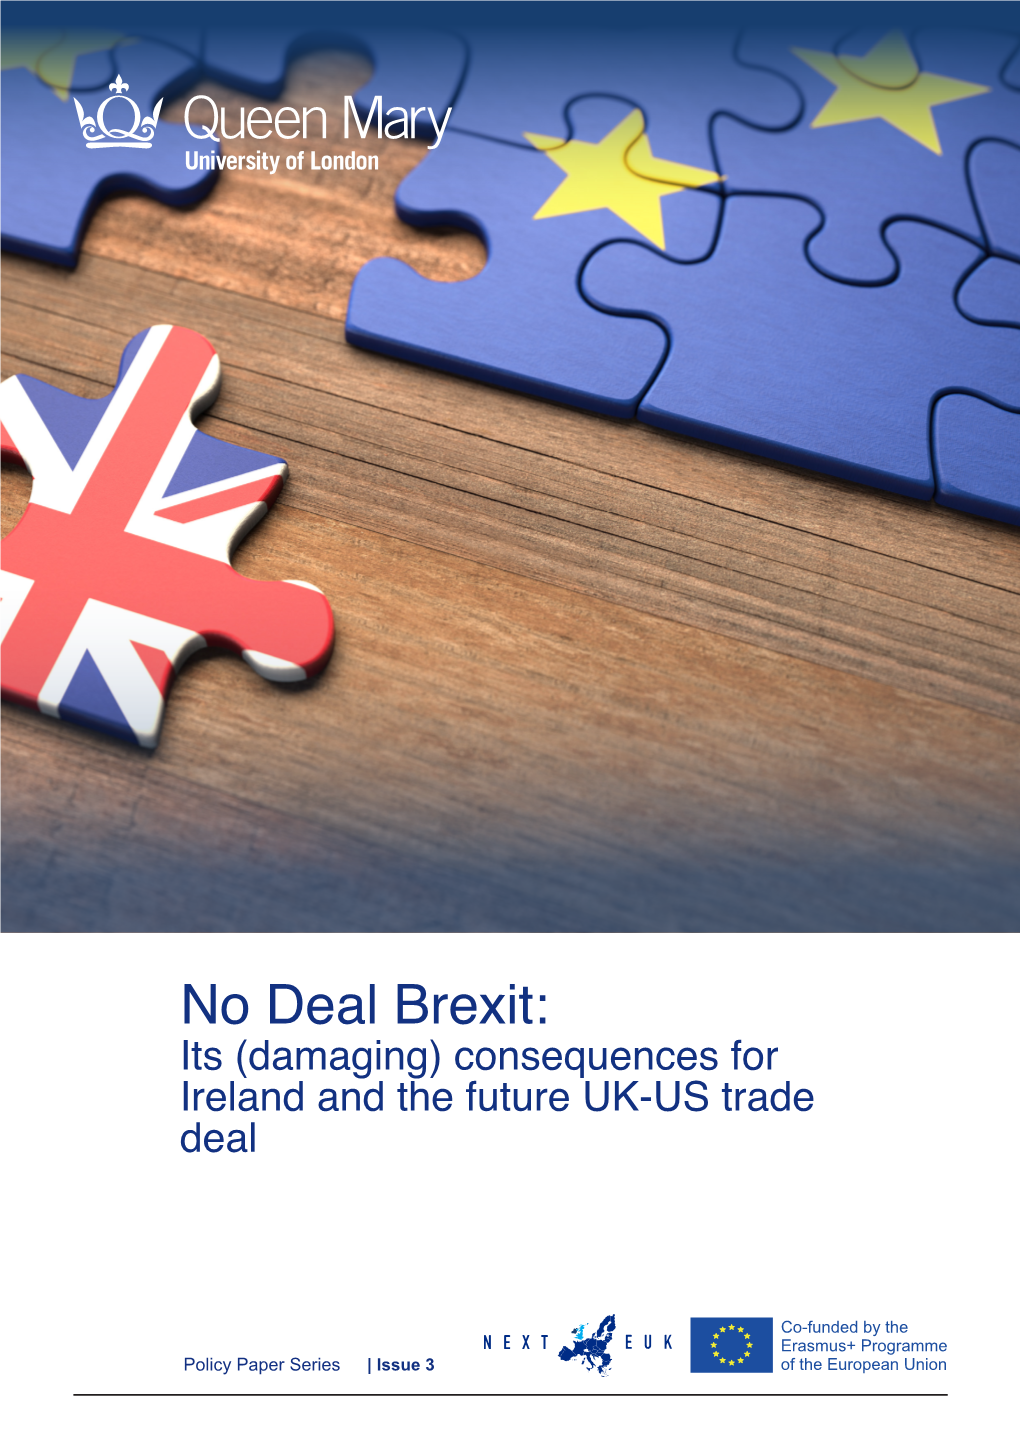 No Deal Brexit: Its (Damaging) Consequences for Ireland and the Future UK-US Trade Deal